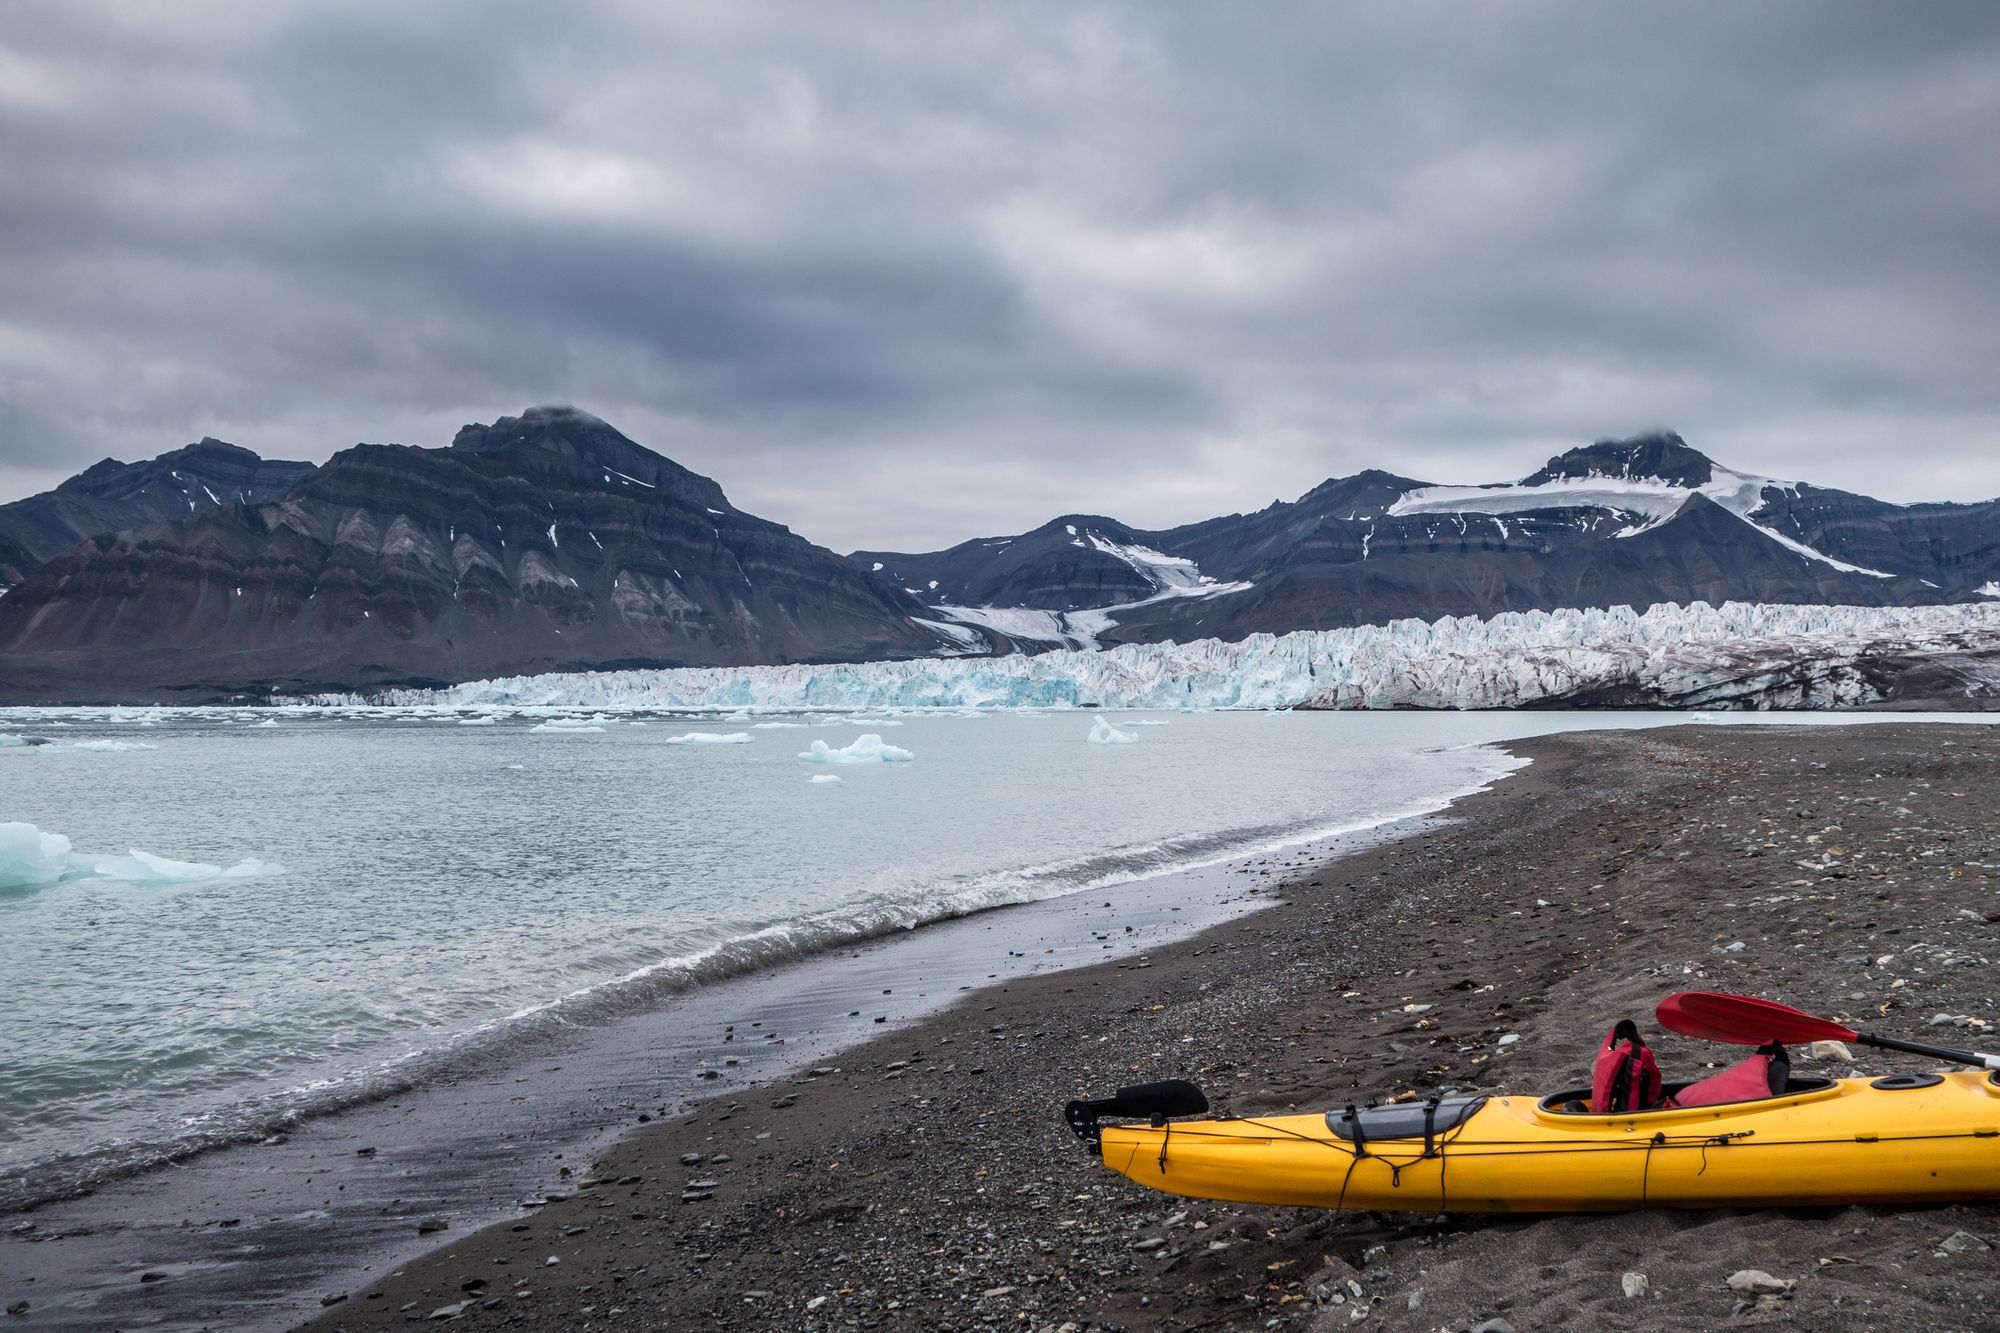 A kayak on a dark beach in Svalbard, with glaciers and mountains in the background.